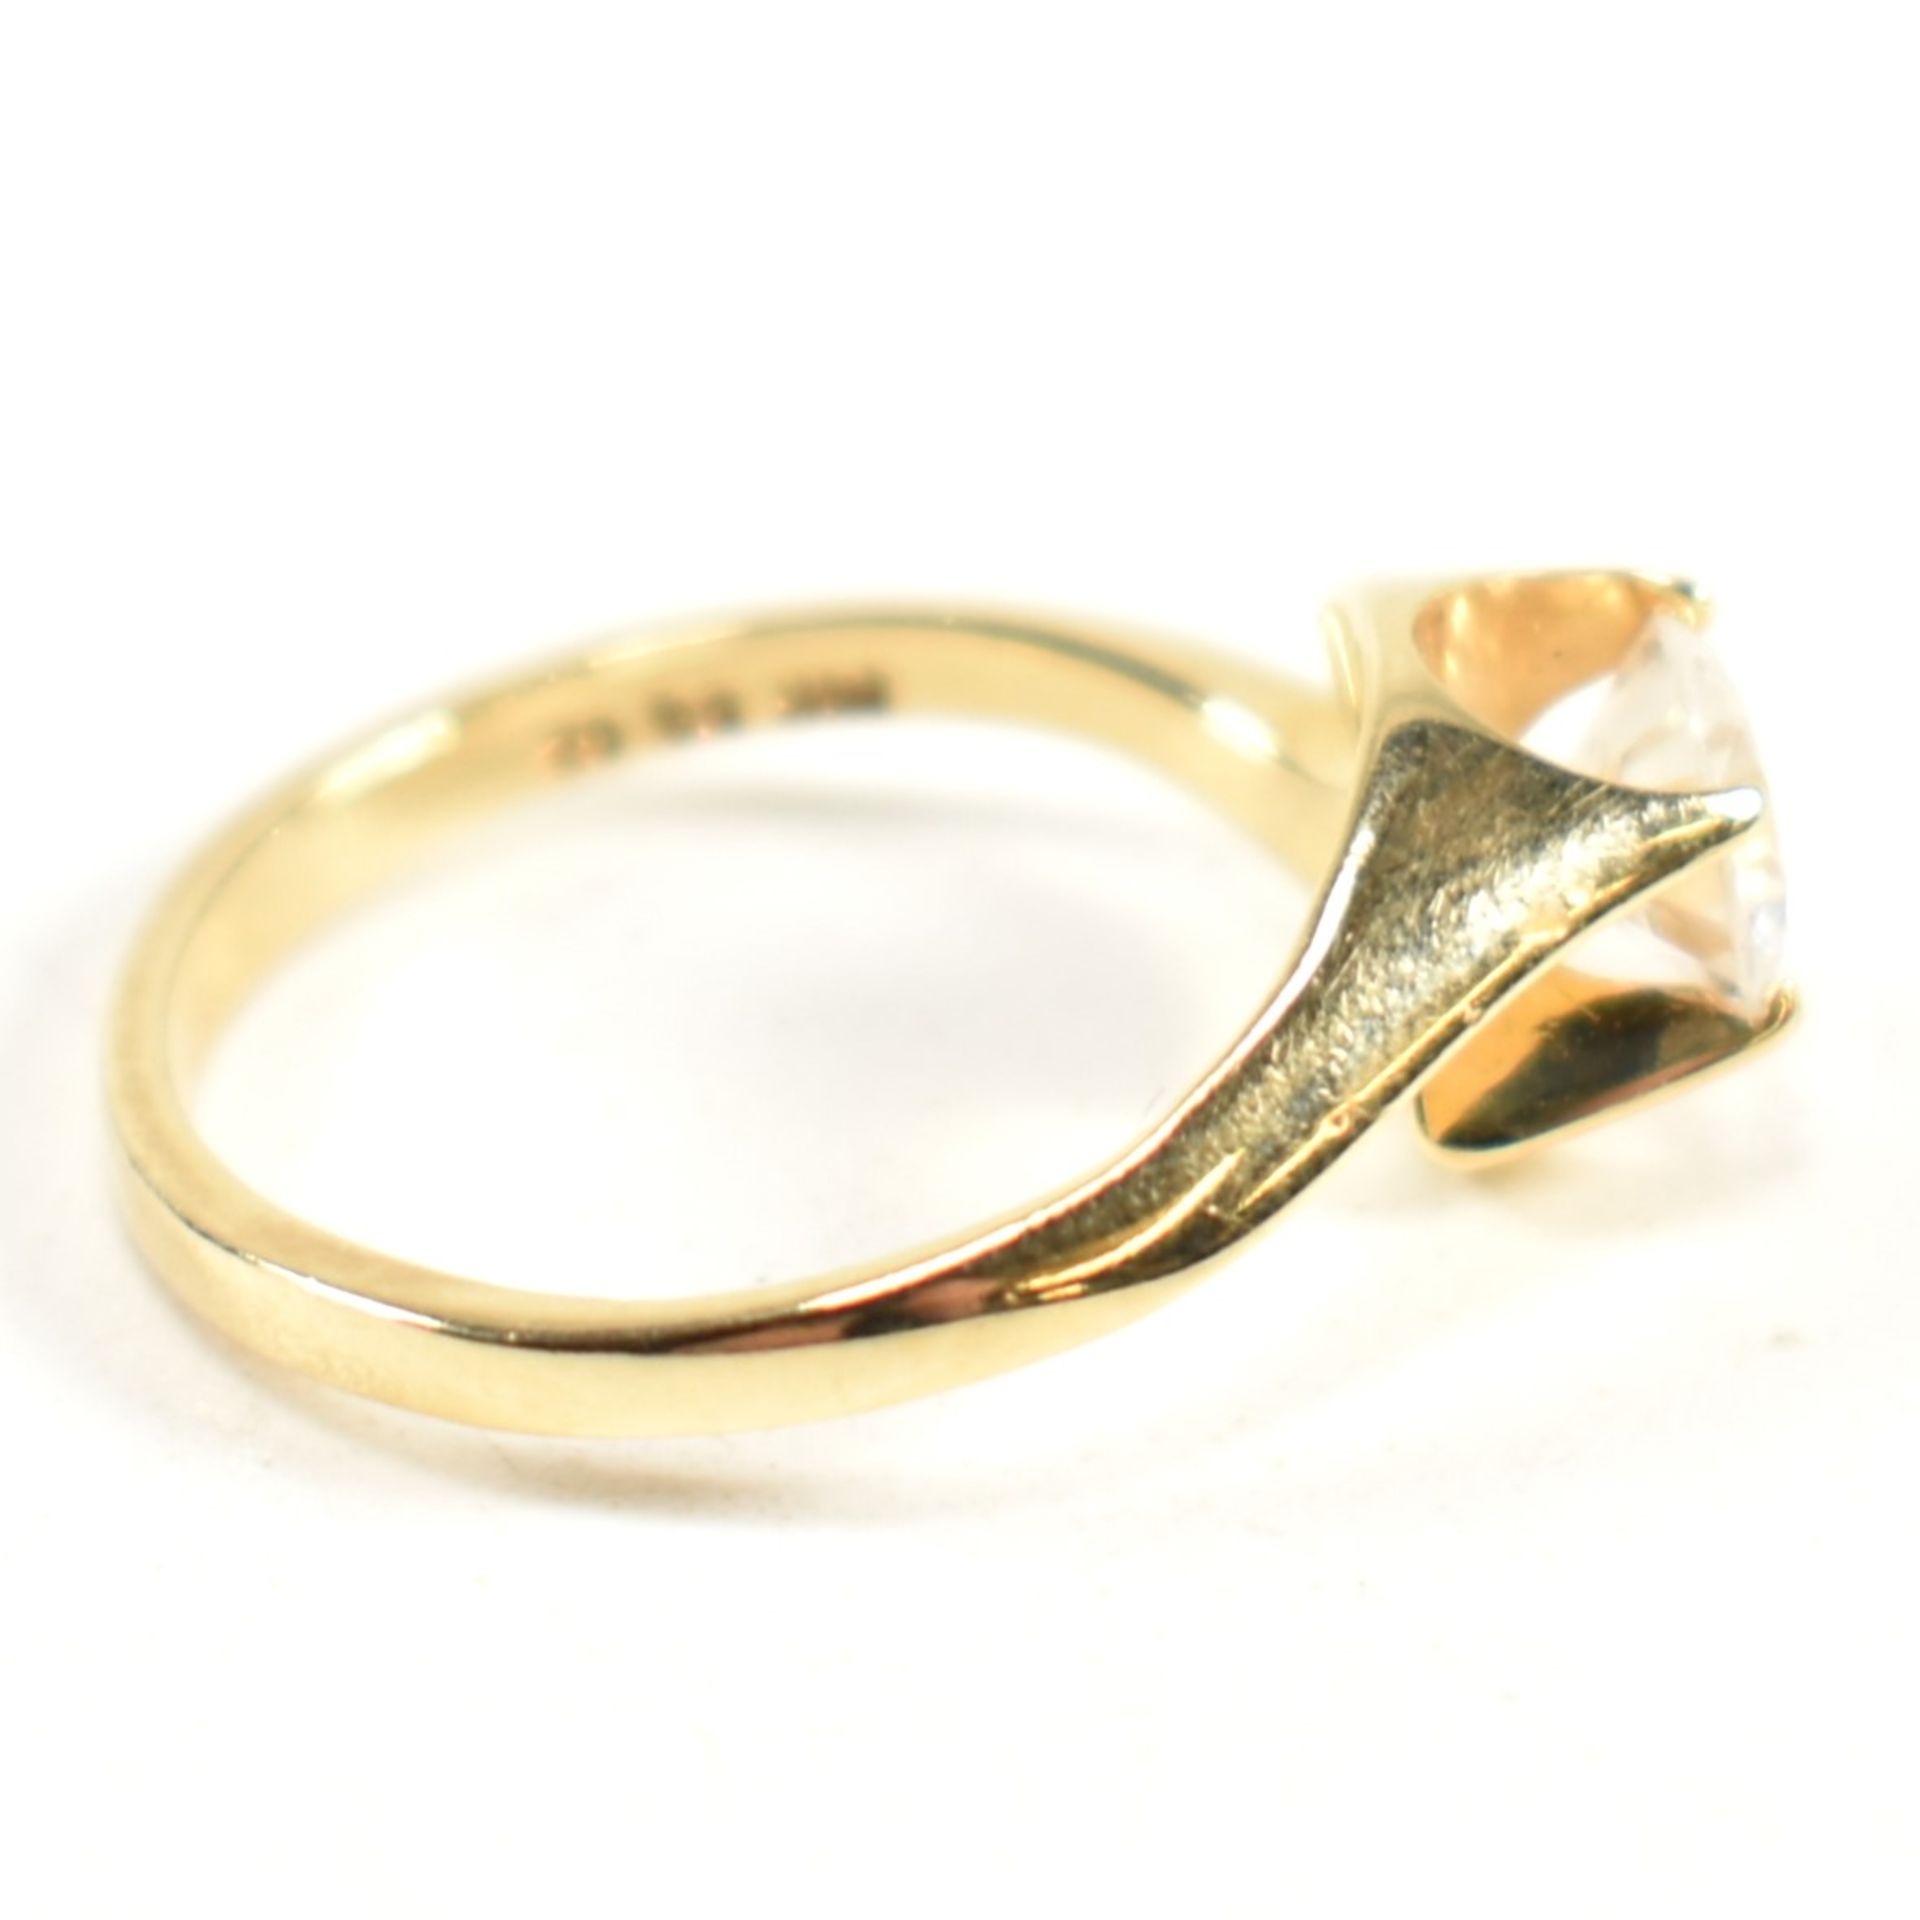 HALLMARKED 14CT GOLD & CZ CROSSOVER RING - Image 4 of 9